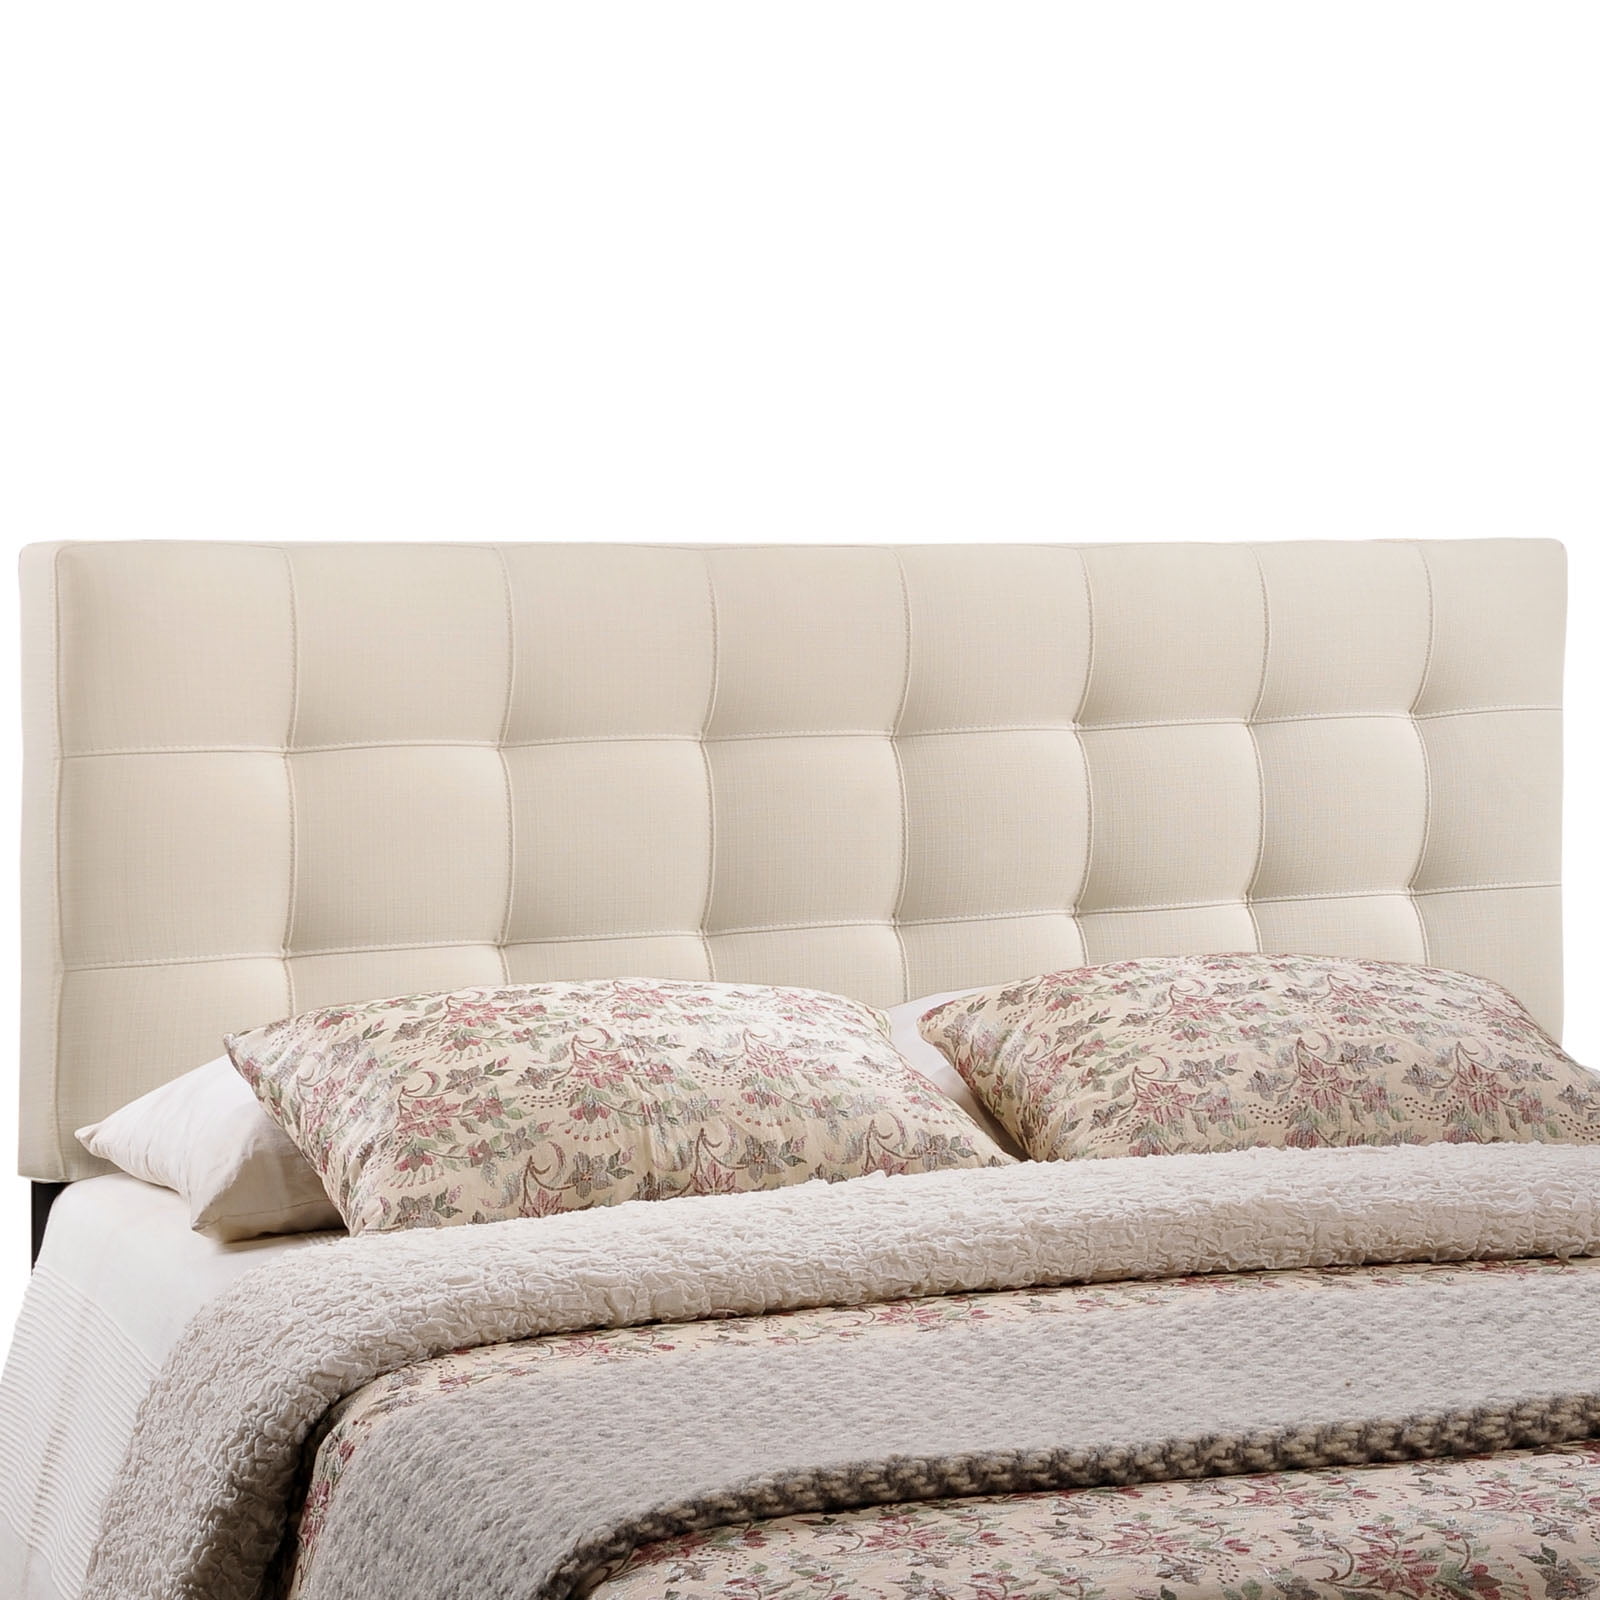 Modway Lily Tufted Headboard, King, Off-White - Walmart.com